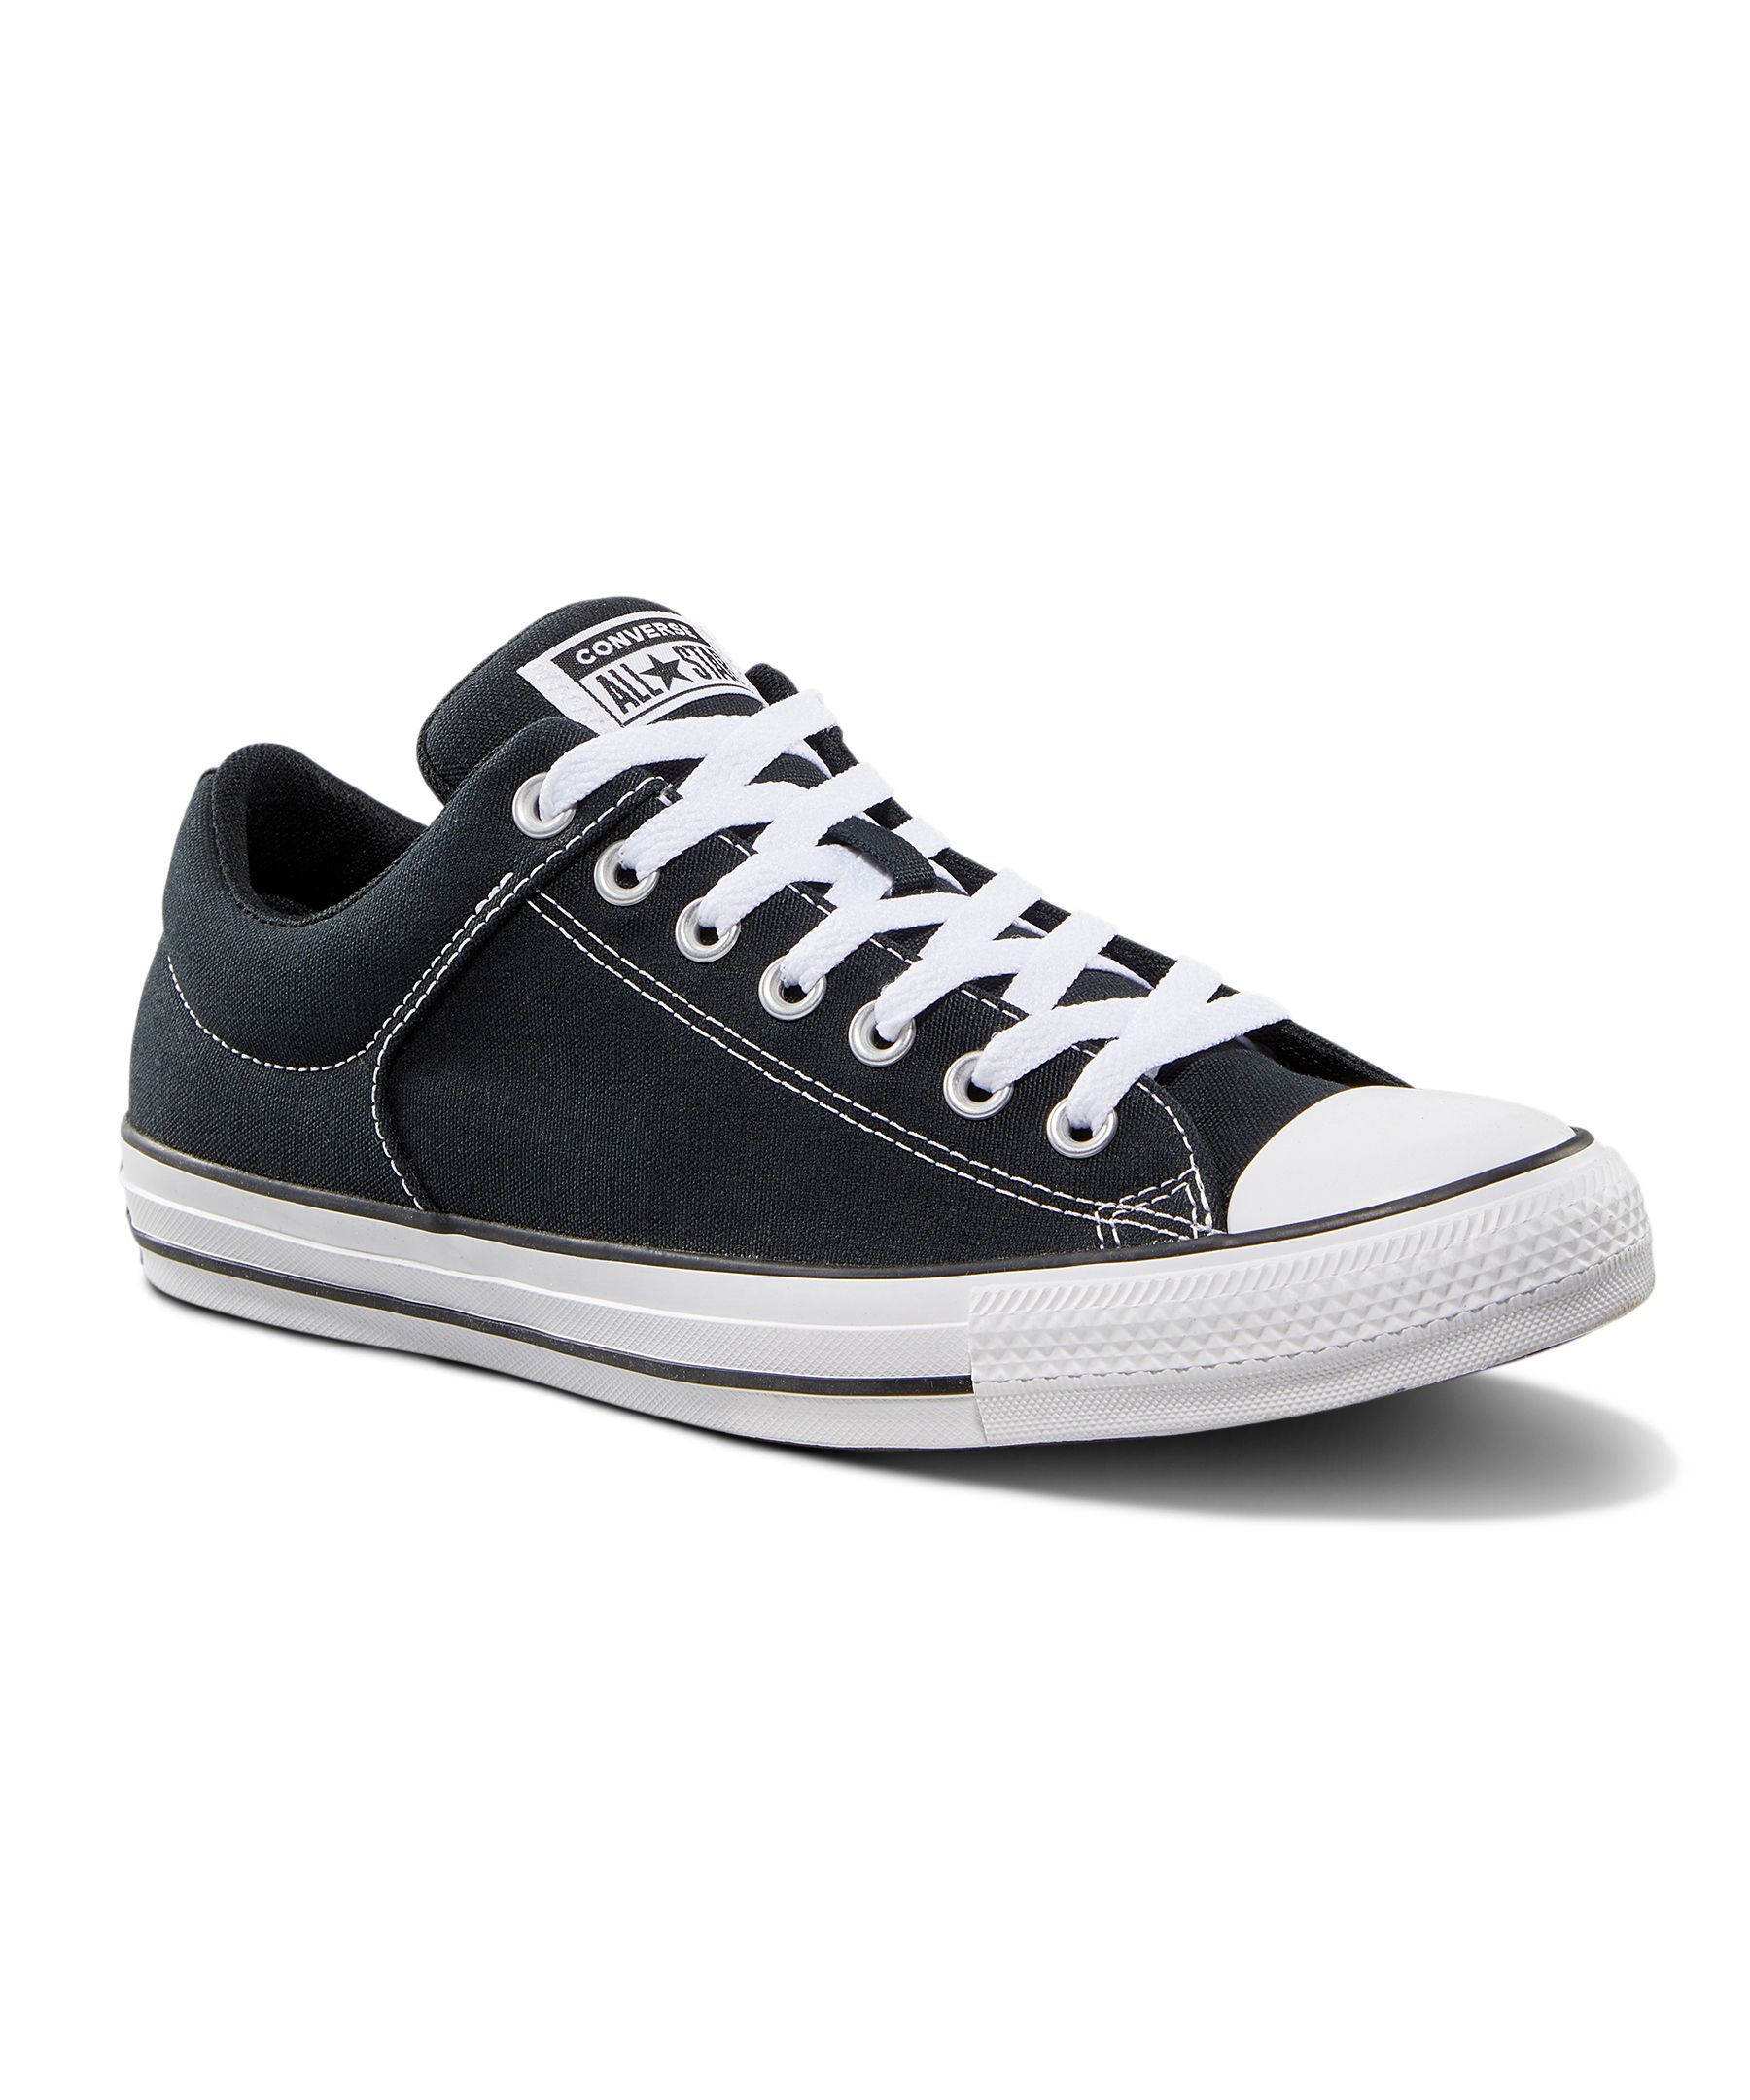 Men's Chuck Taylor All Star High Street Top Lace Up Sneakers